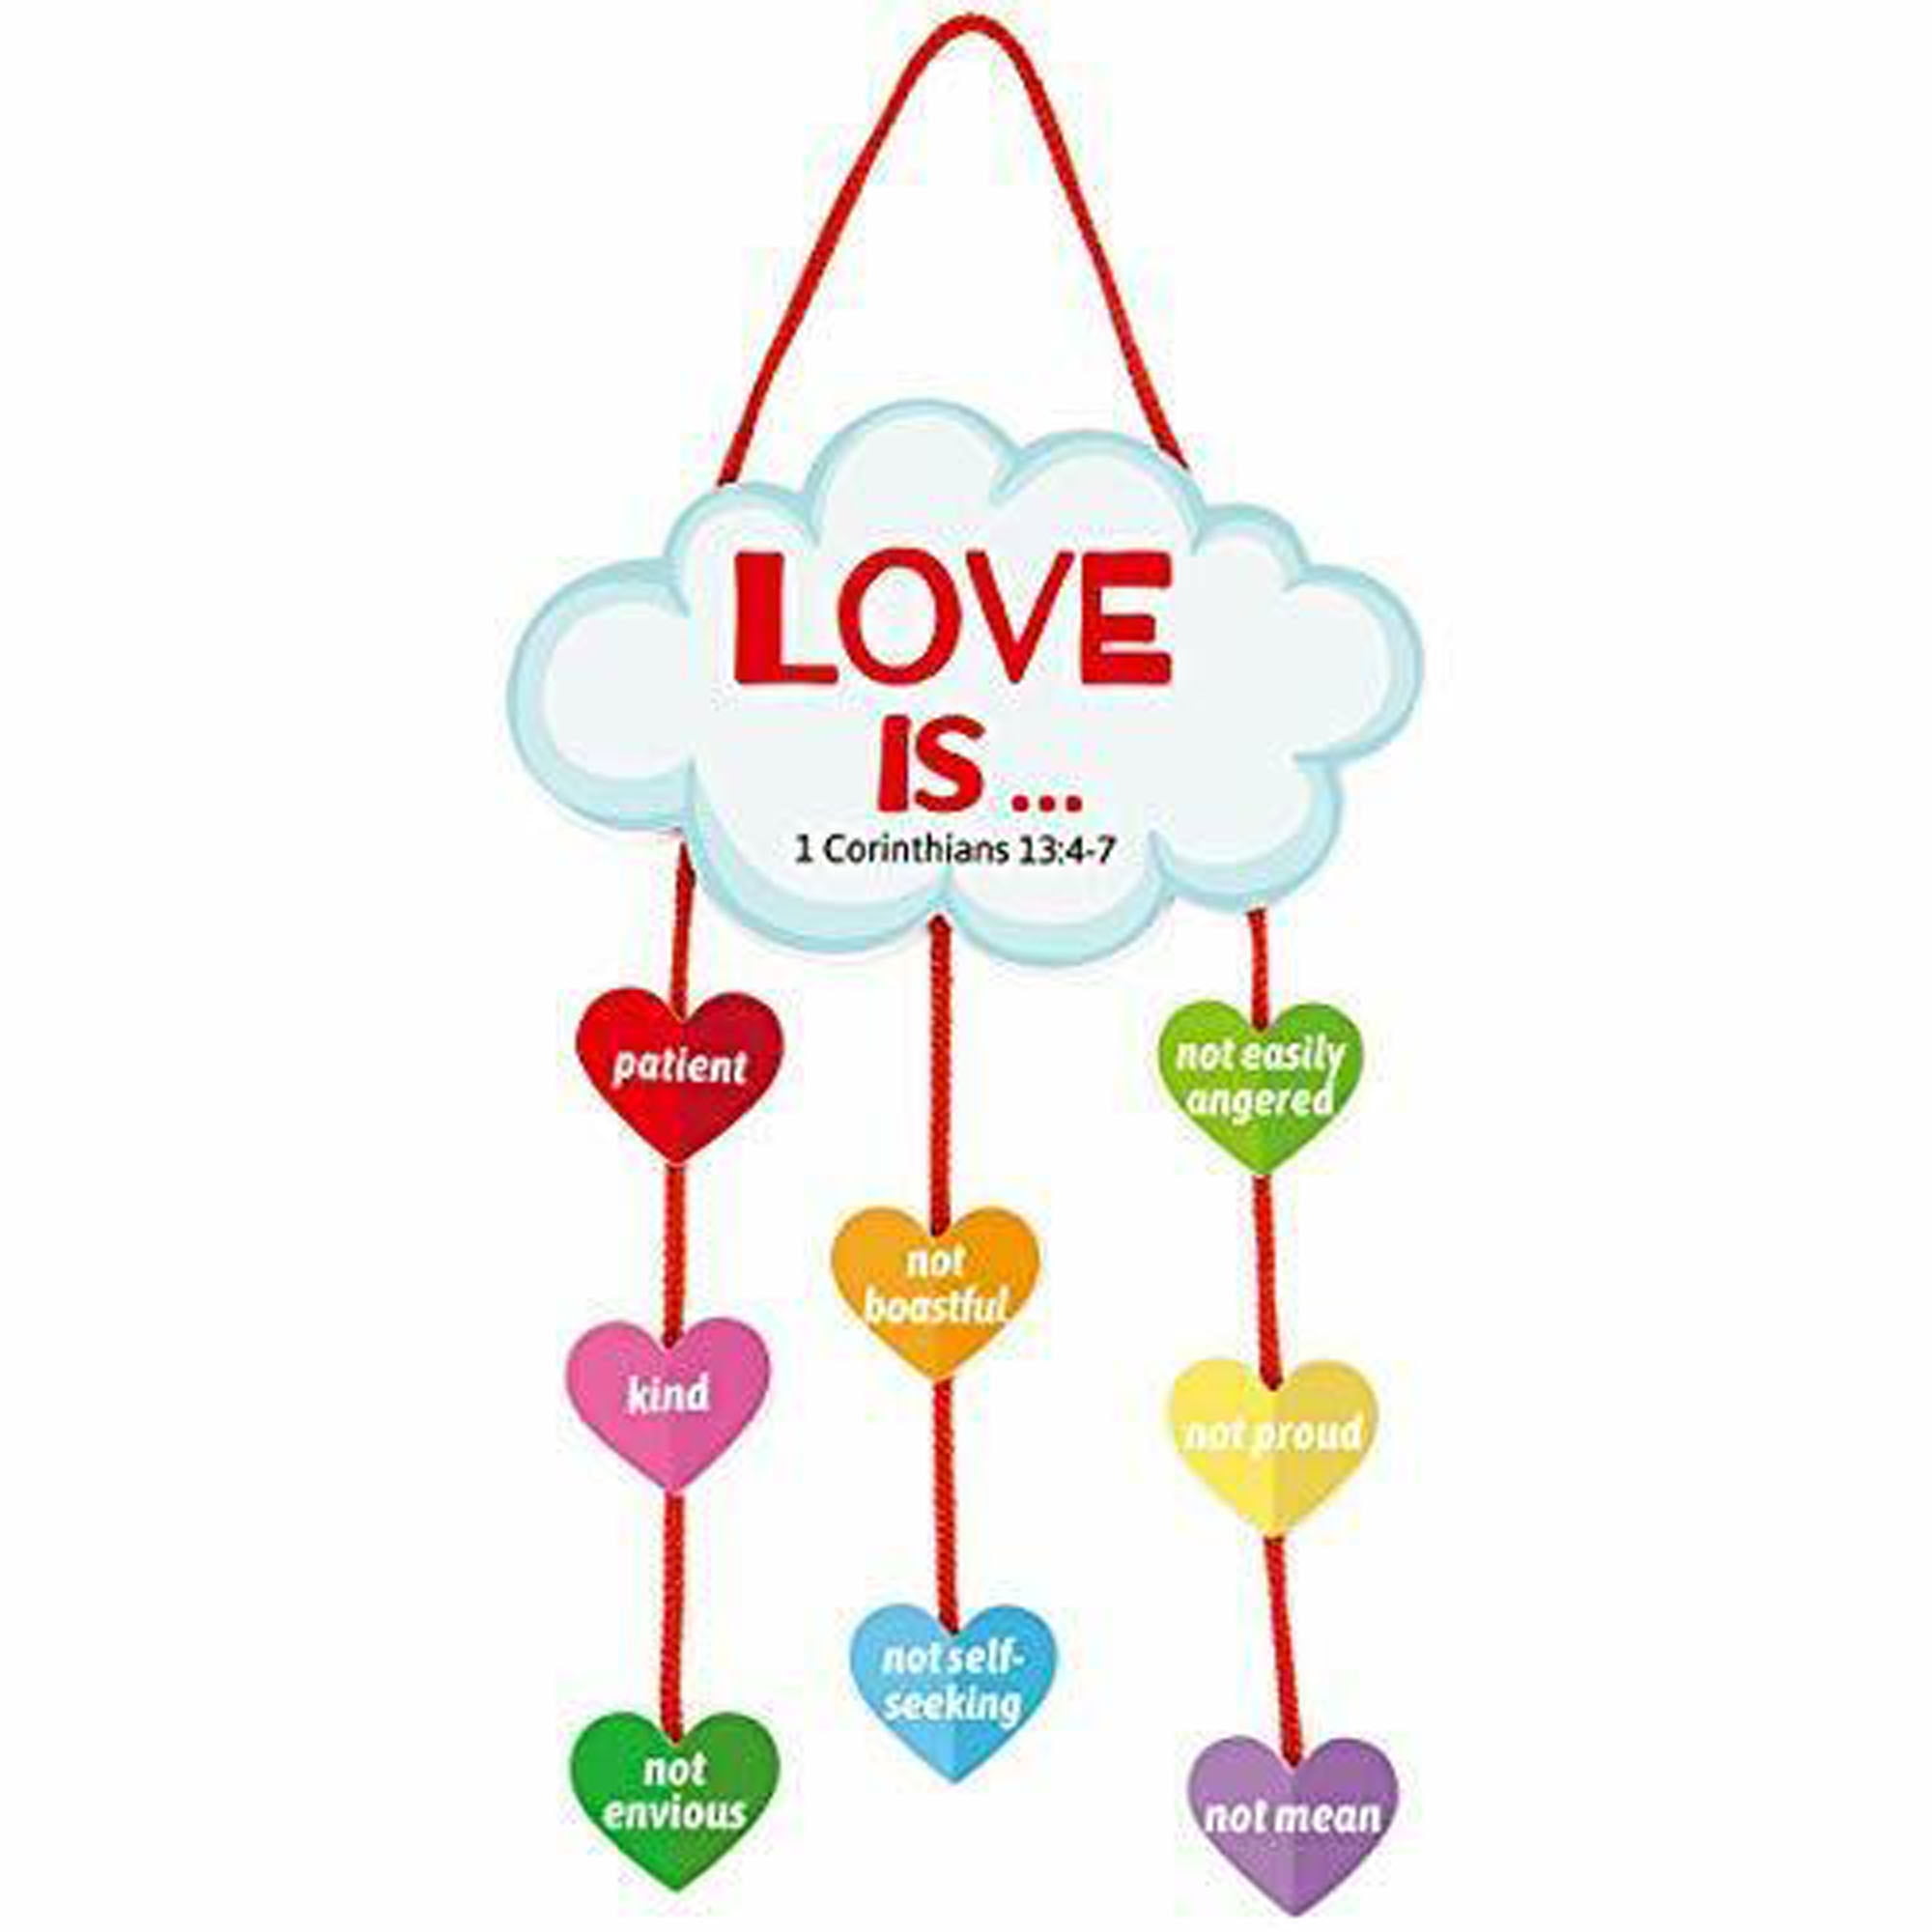 1215 Pieces Valentine's Day Crafts for Kids Foam Heart Craft Set DIY Foam  Ornaments Kit Includes 30 Colorful Foam Hearts.